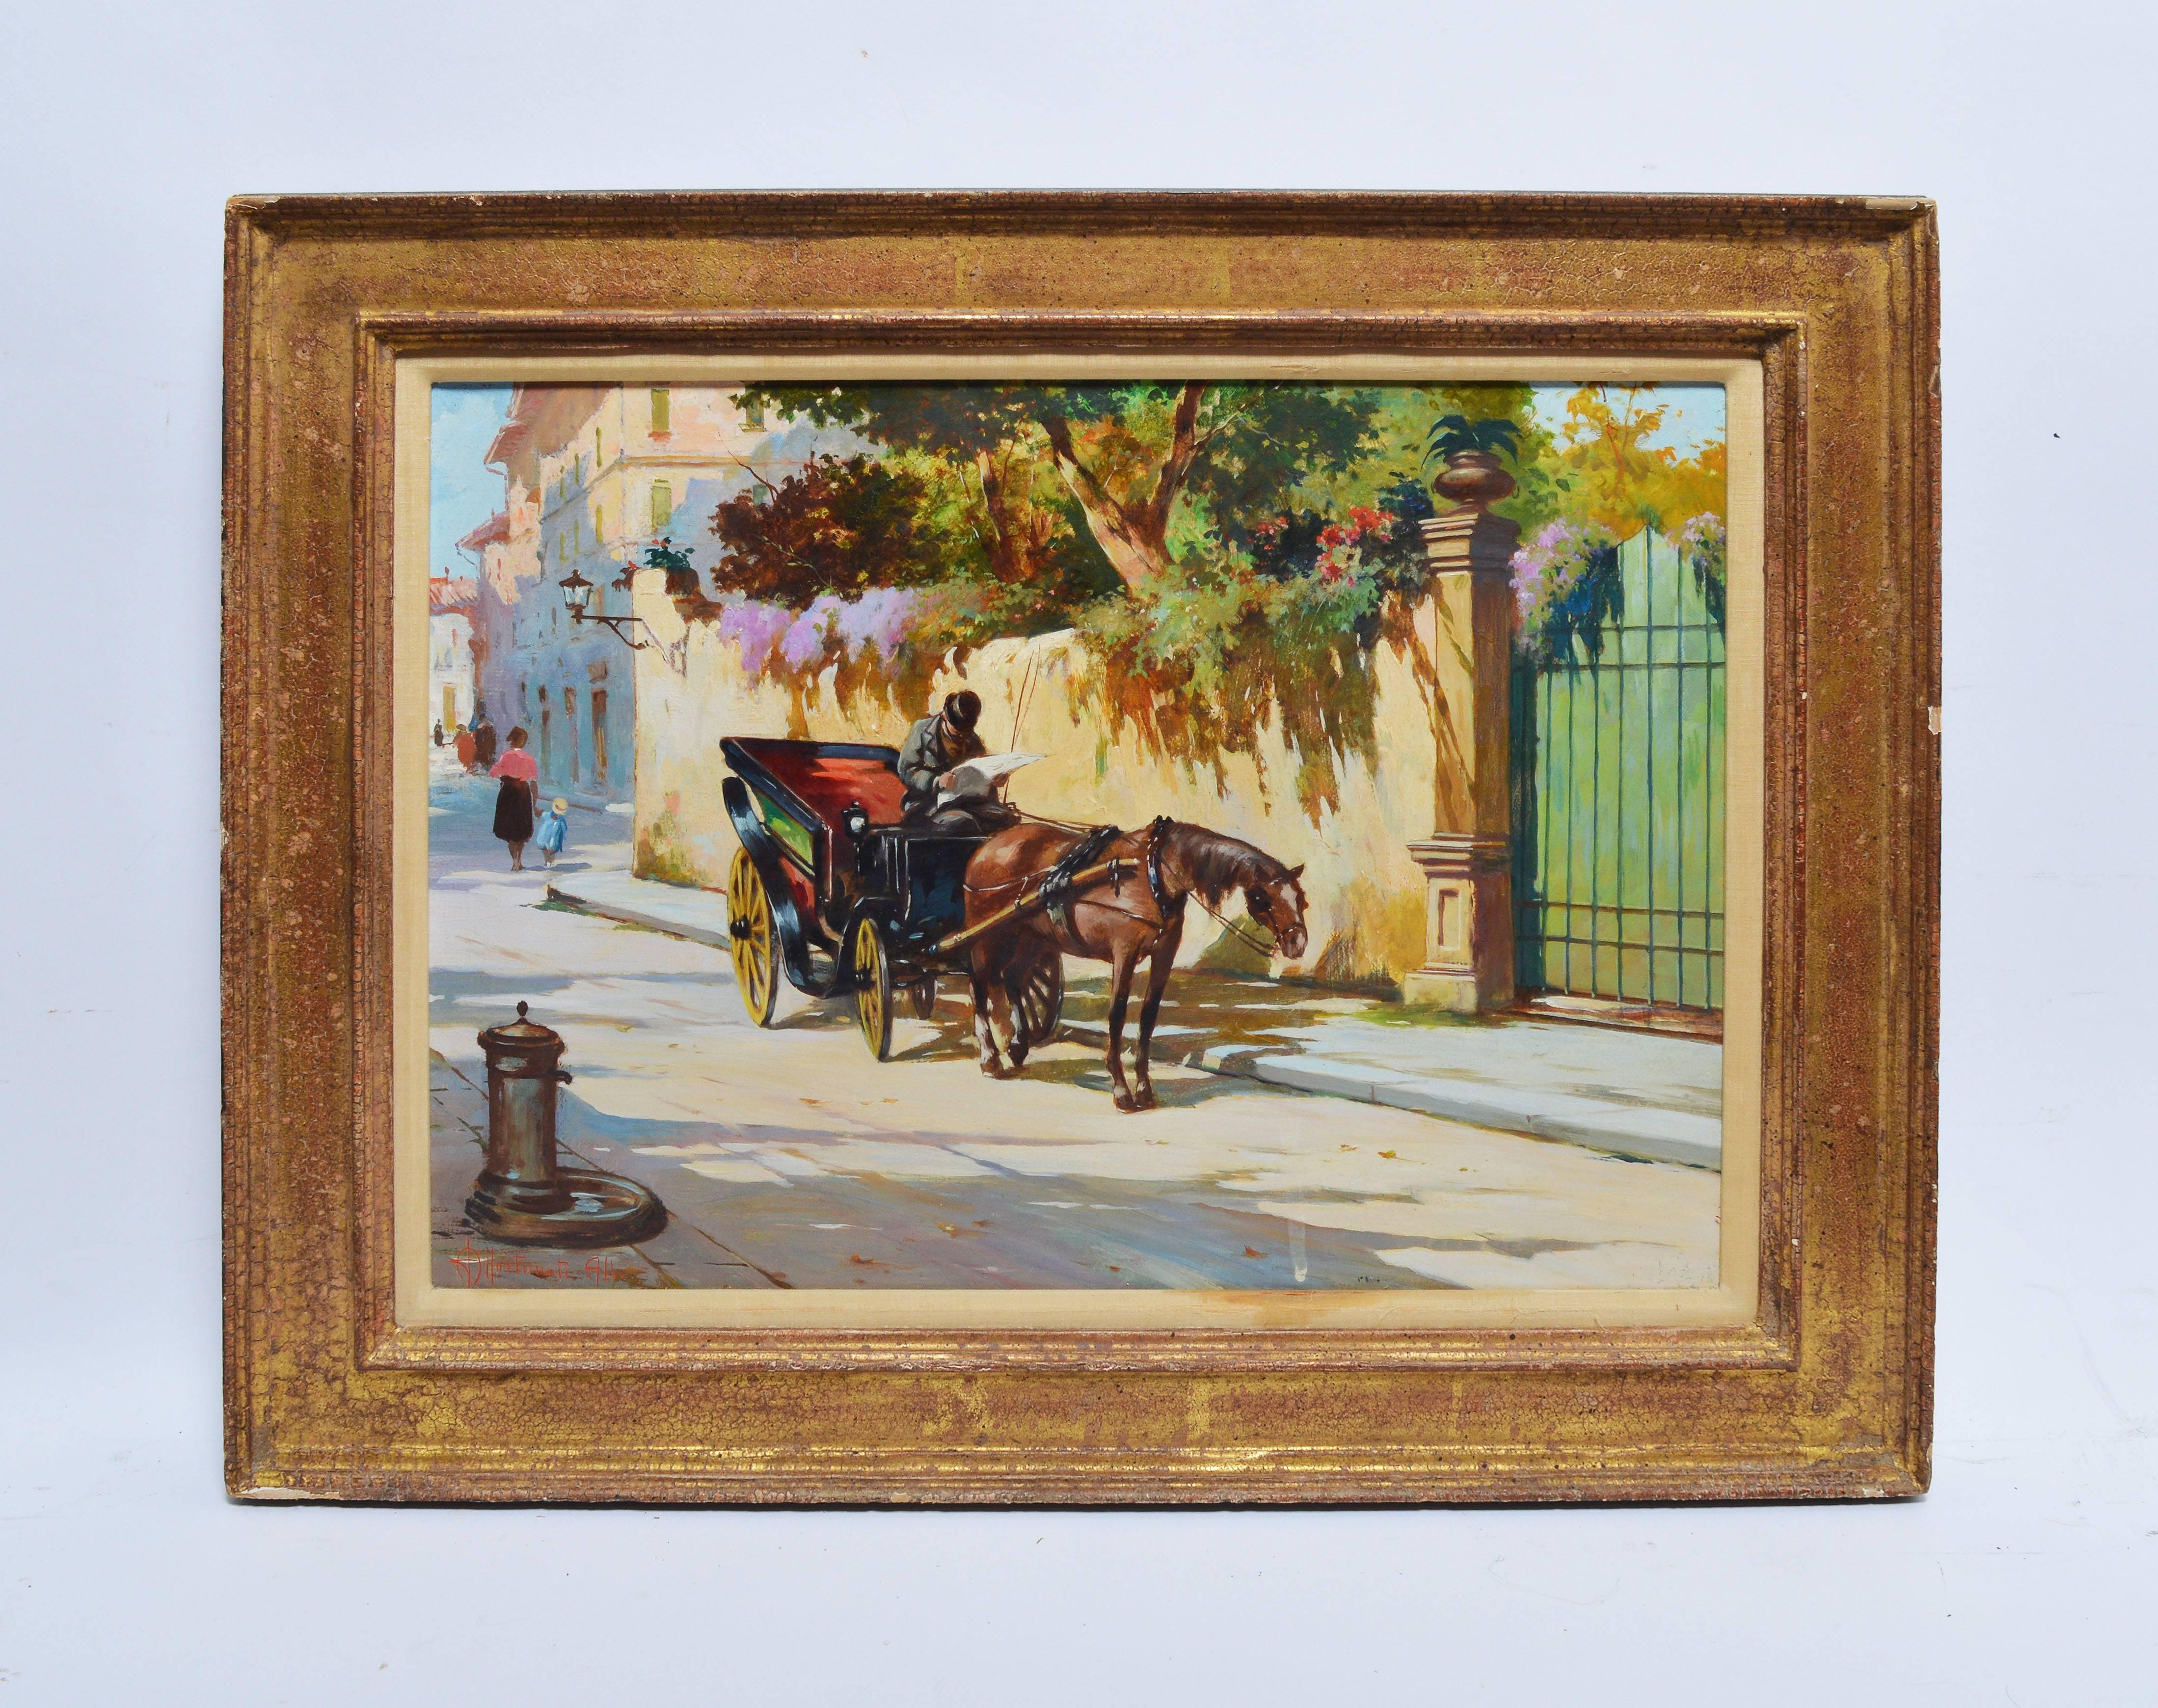 Impressionist view of an Italian city by Aldo Affortunati  (1906 - 1991).  Oil on canvas, circa 1940.  Signed lower left, 